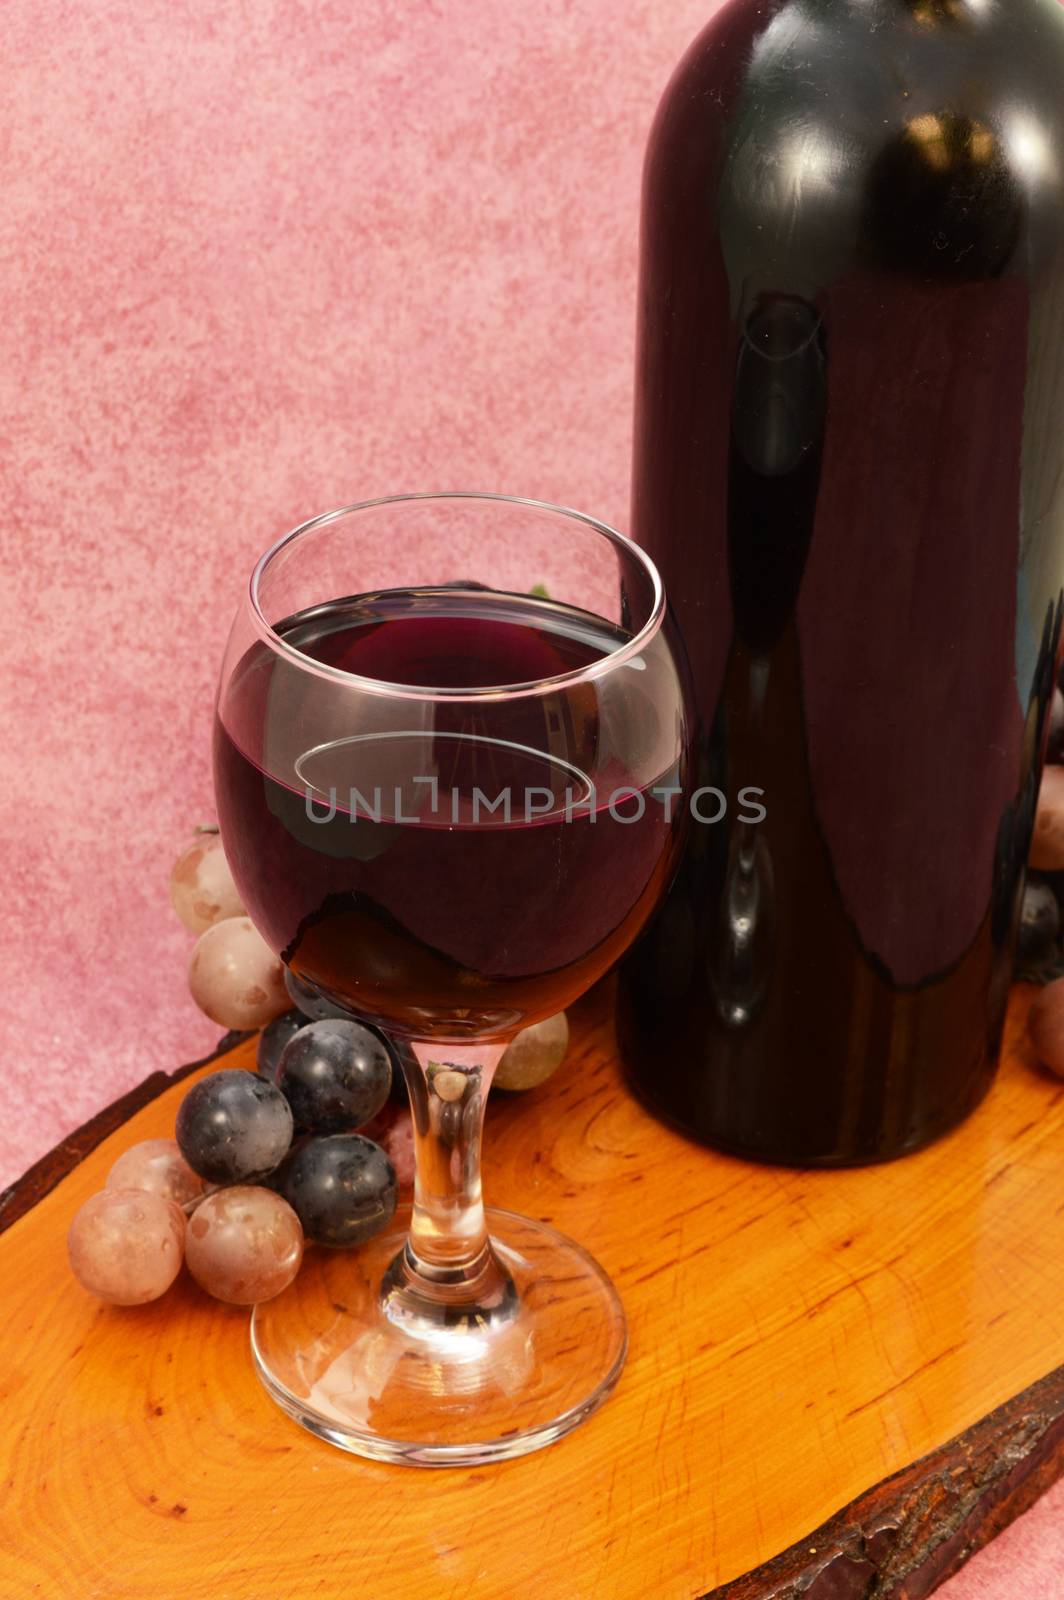 A glass of fresh grape wine from a newly opened bottle.